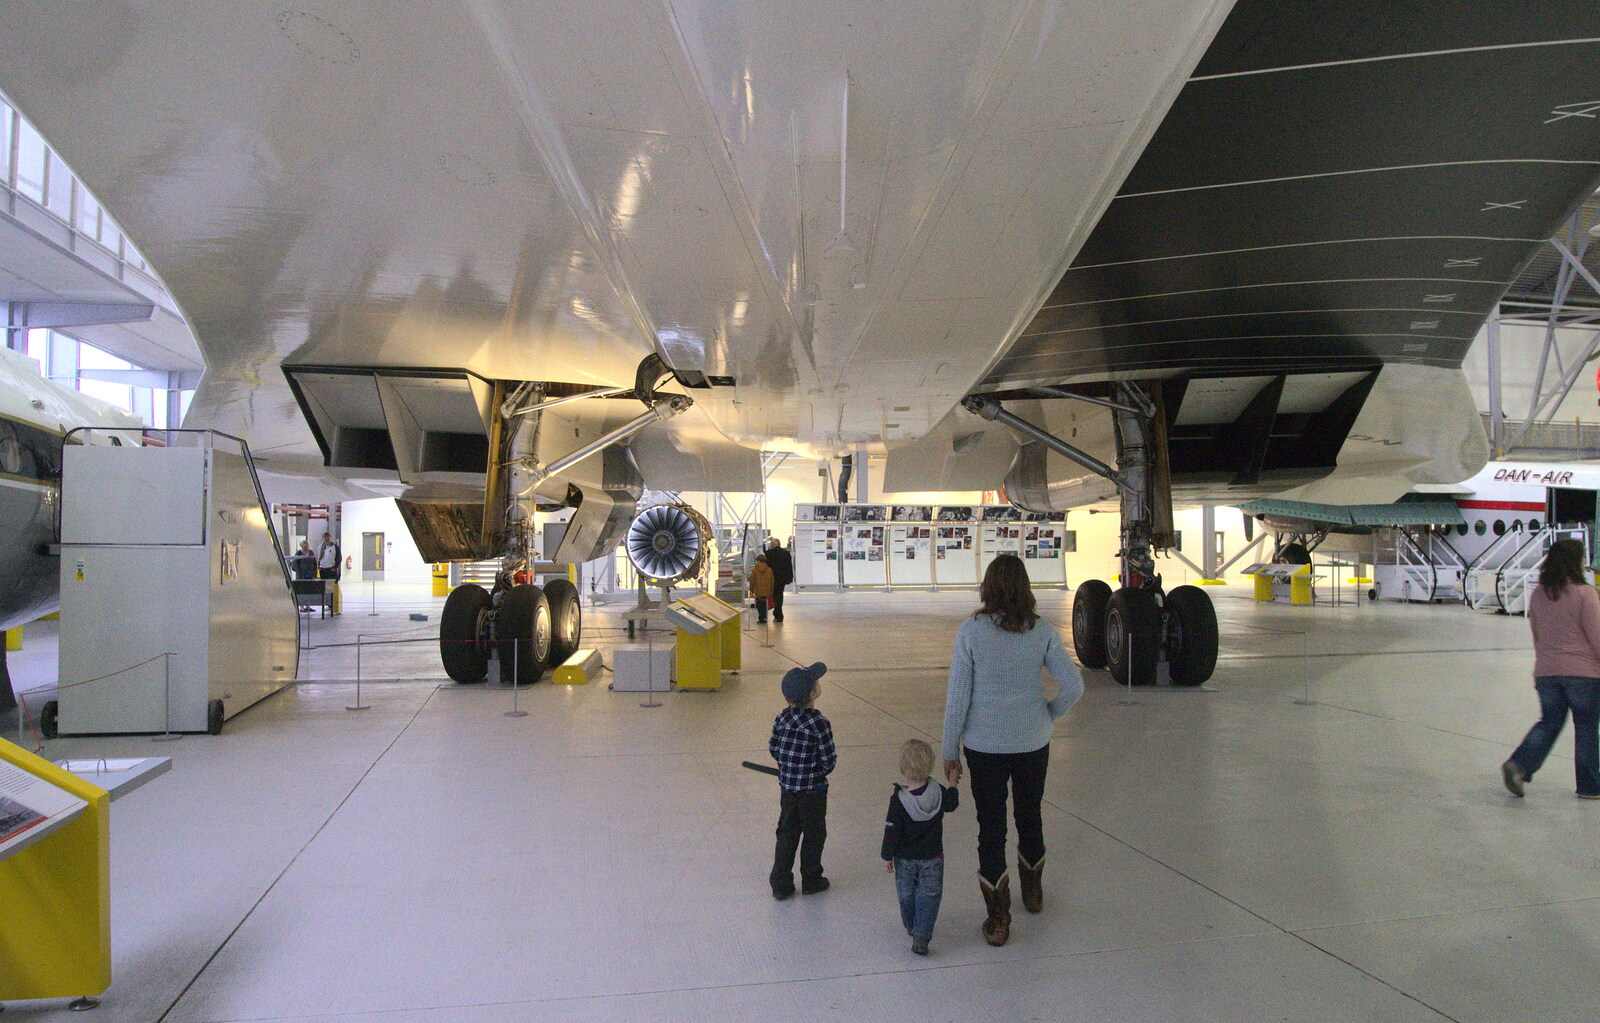 Under the belly of Concorde from A Day Out at Duxford, Cambridgeshire - 9th March 2014